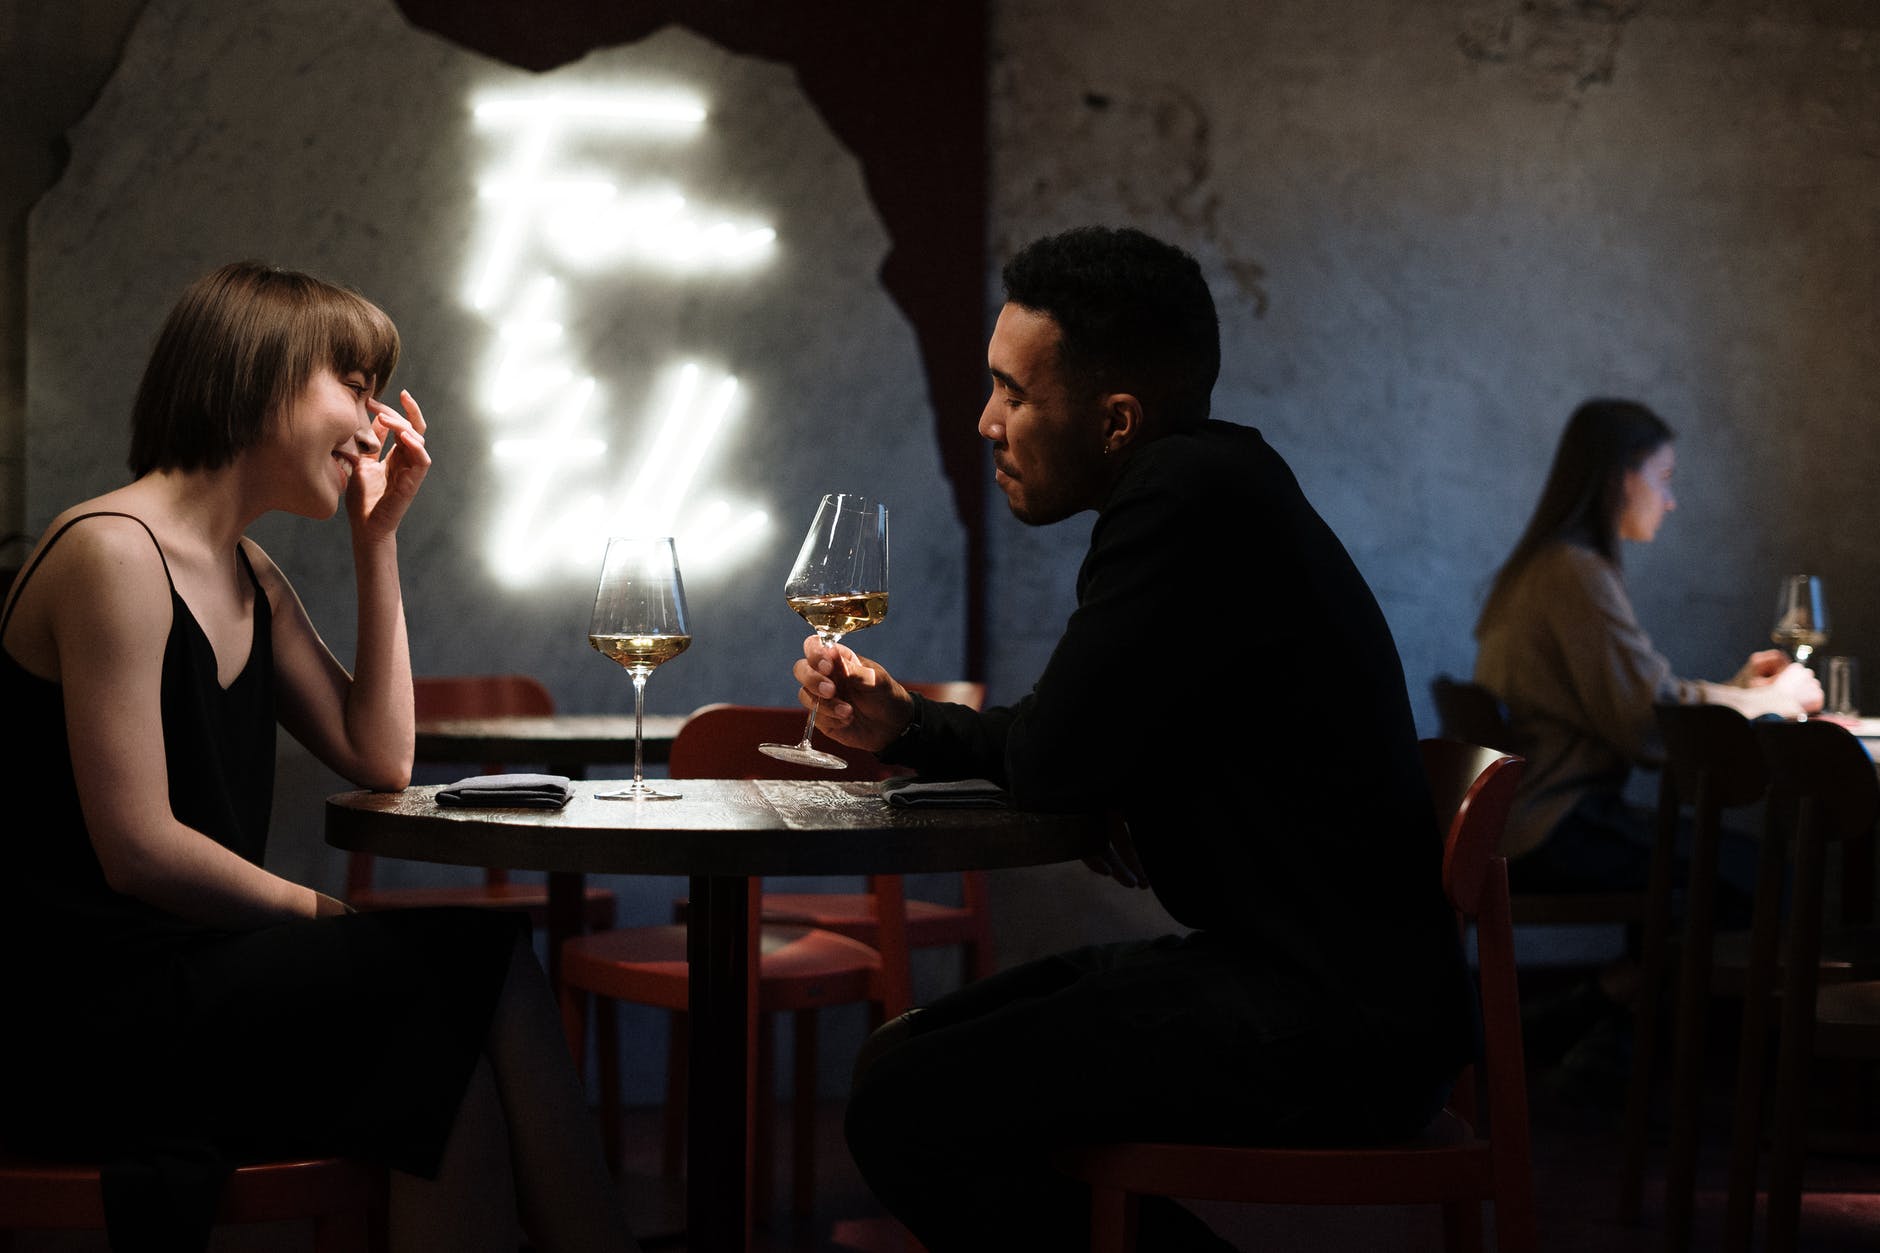 Interracial couple on a dinner date drinking wine at a table